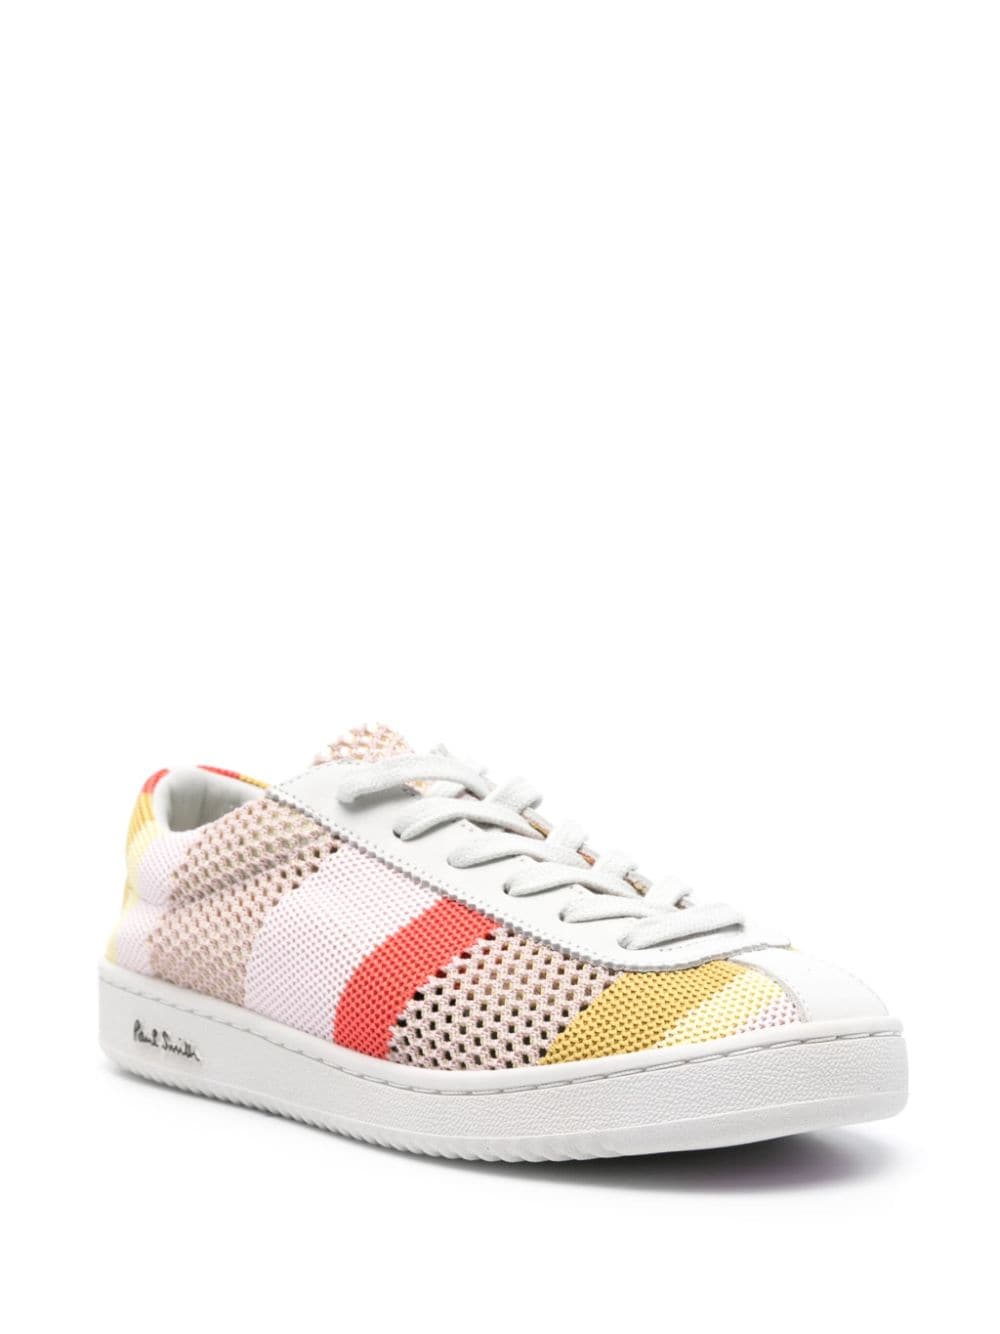 Paul Smith Sneakers Pink